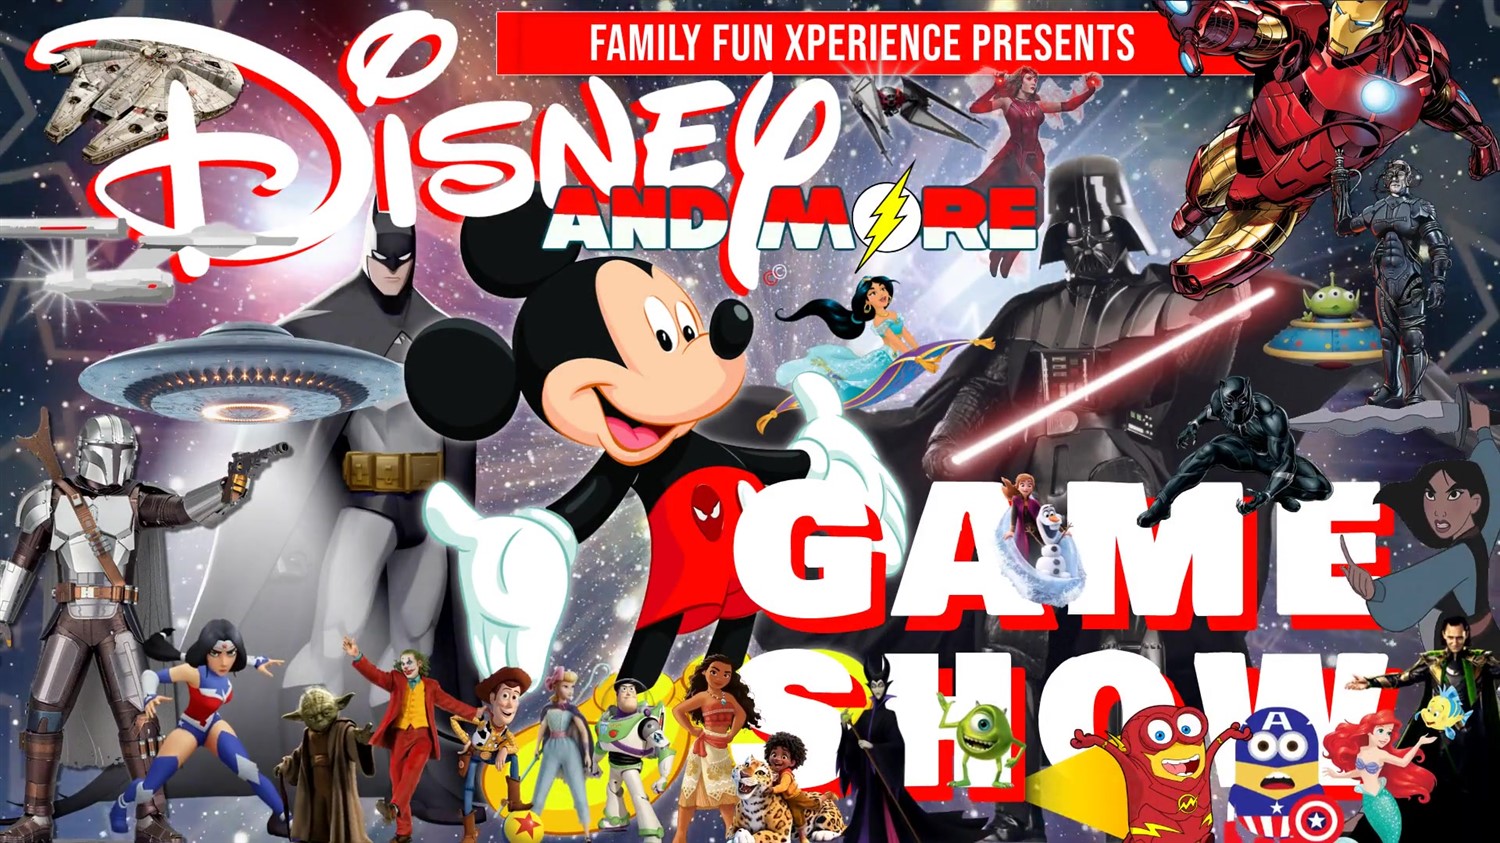 Disney, Supers, & Sci-Fi Game Show (matinee) Animation & Movies, Superheroes & Villains, plus Sci-Fi & More! on Jun 30, 15:00@FFX Theatre - Pick a seat, Buy tickets and Get information on Family Fun Xperience tickets.ffxshow.org